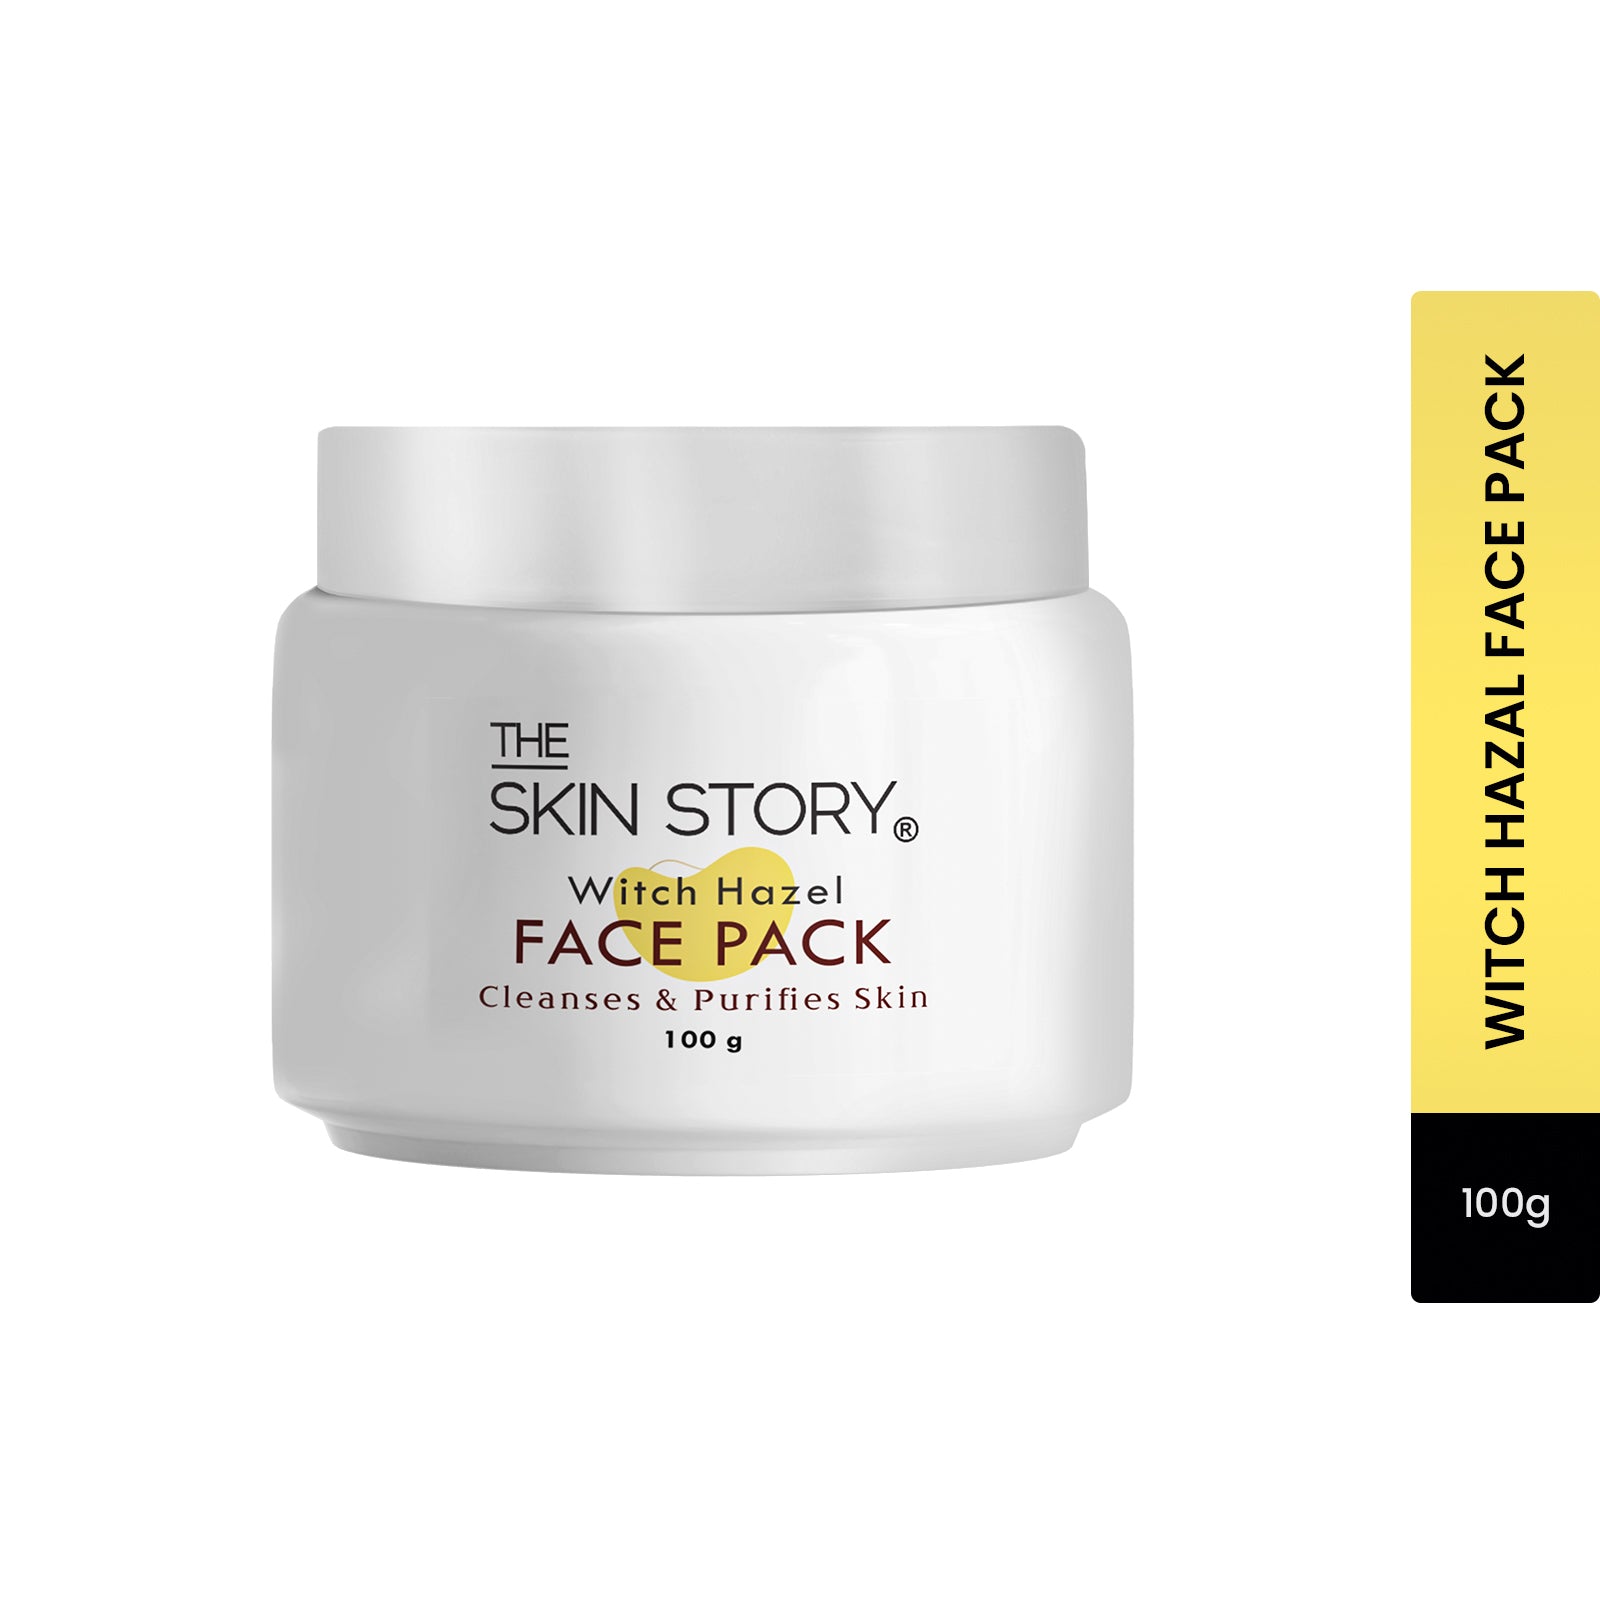 The Skin Story Deep Cleansing Face Pack for Glowing Skin | French Multani Mitti| Normal to Oily Skin | Infused with Essential Witch Hazel | 100g